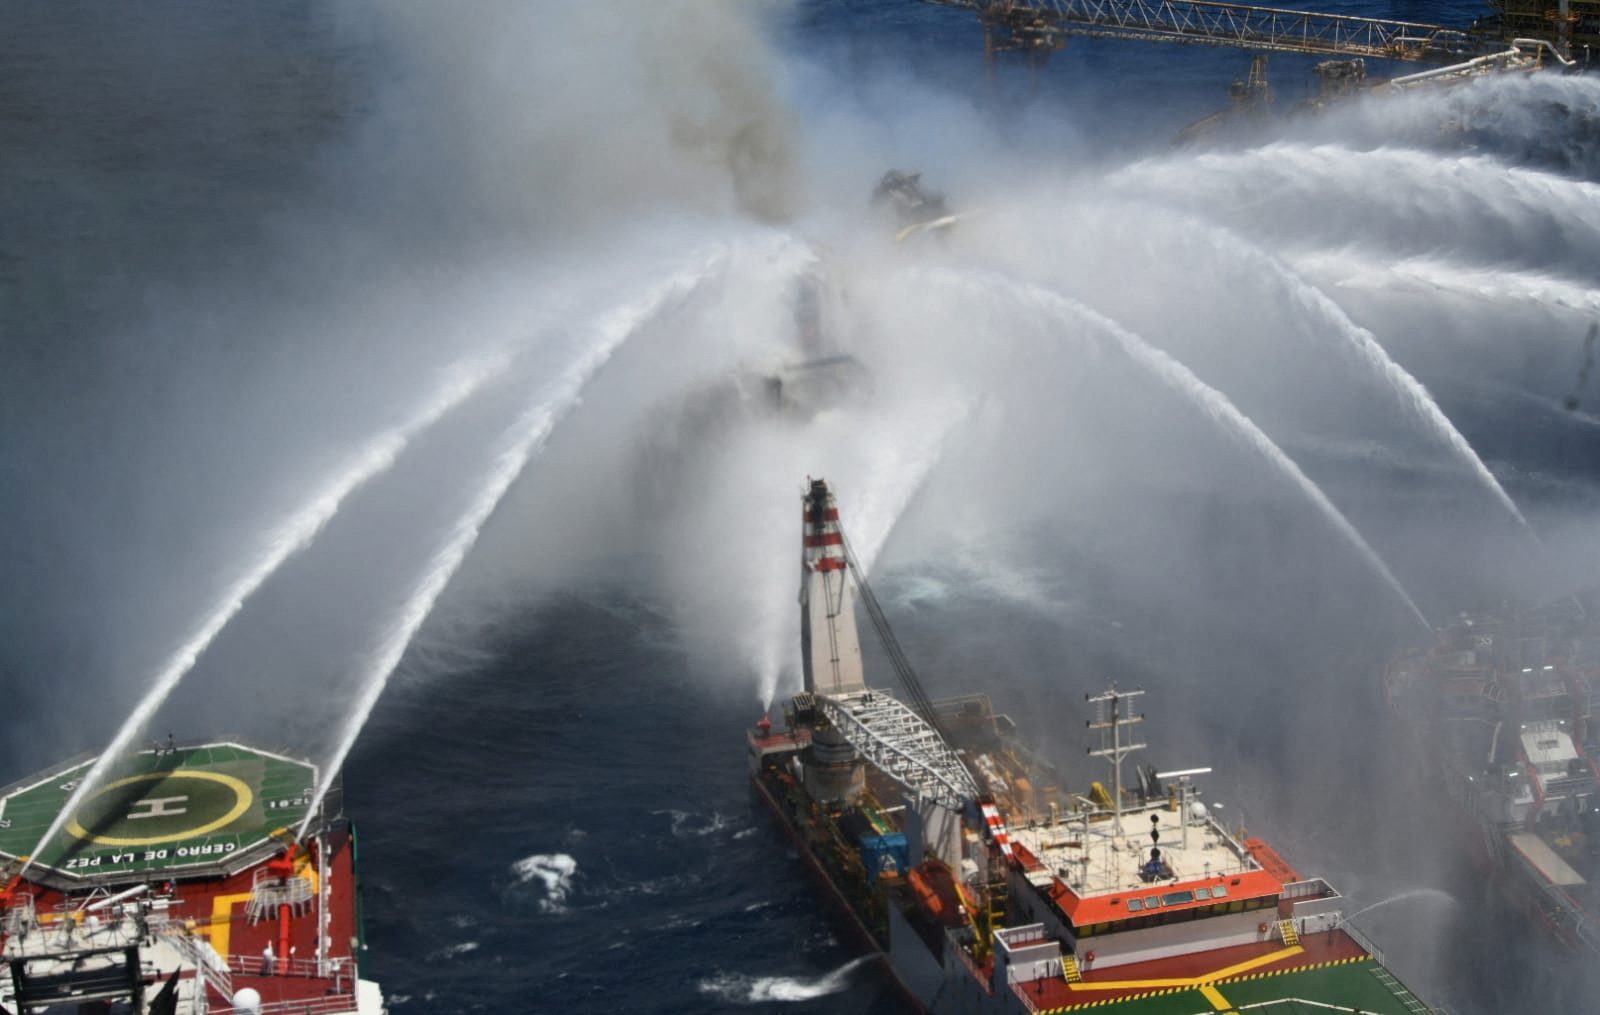 Boats spray water onto an offshore oil platform that caught fire at the Pemex's Cantarell Field, in the Bay of Campeche, Mexico July 7, 2023. Courtesy Petroleos Mexicanos (PEMEX) @Pemex/Handout via REUTERS